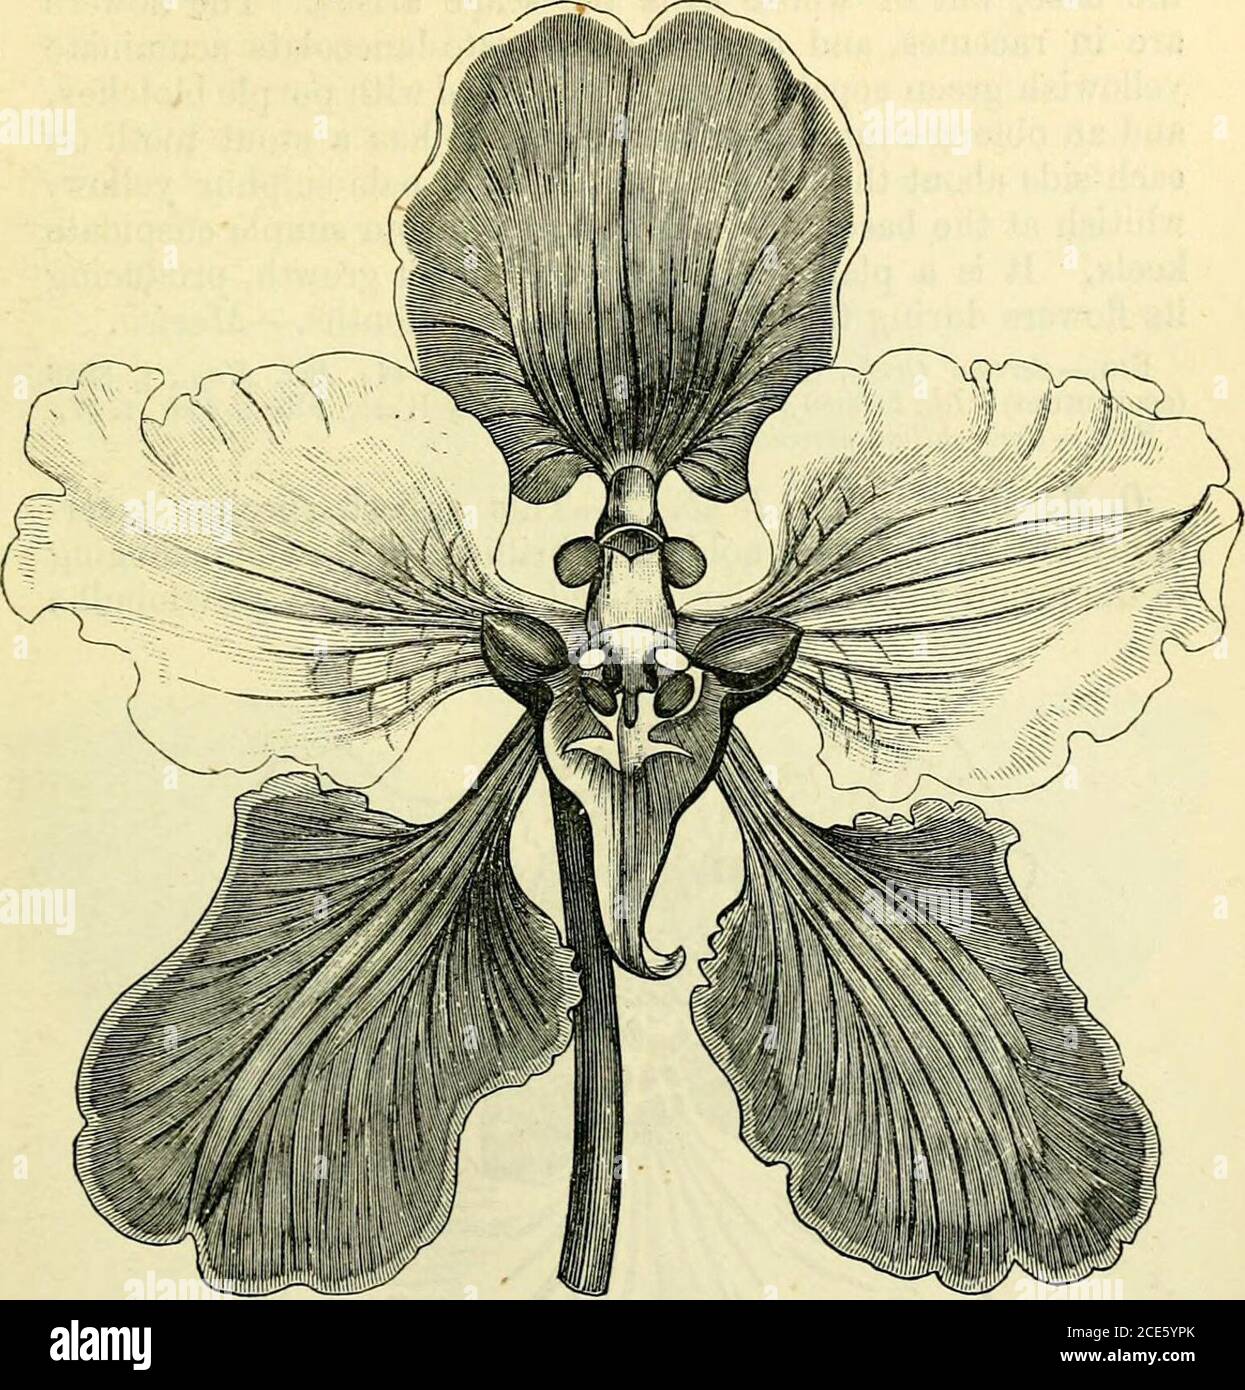 . The orchid-grower's manual : containing descriptions of the best species and varieties of orchidaceous plants . months, and continues in per-fection a long time. This is best grown in a pot with peat.—Jamaica. Fia.—Bot. Reg., 1839, t. 16. Syn.—Oncidiumcuneatum; O.Borjdii; Epidendruvi guttatum; Cymbidiumguttatum. 0. macrantlium, Lindley.—This magnificent Oncidium is agreat acquisition to the genus, being one of the handsomestspecies yet introduced. It is of free growth, with large ovoidpseudobulbs, lanceolate loriform acuminate dark green leaves,and scapes several feet long, twining, branchin Stock Photo